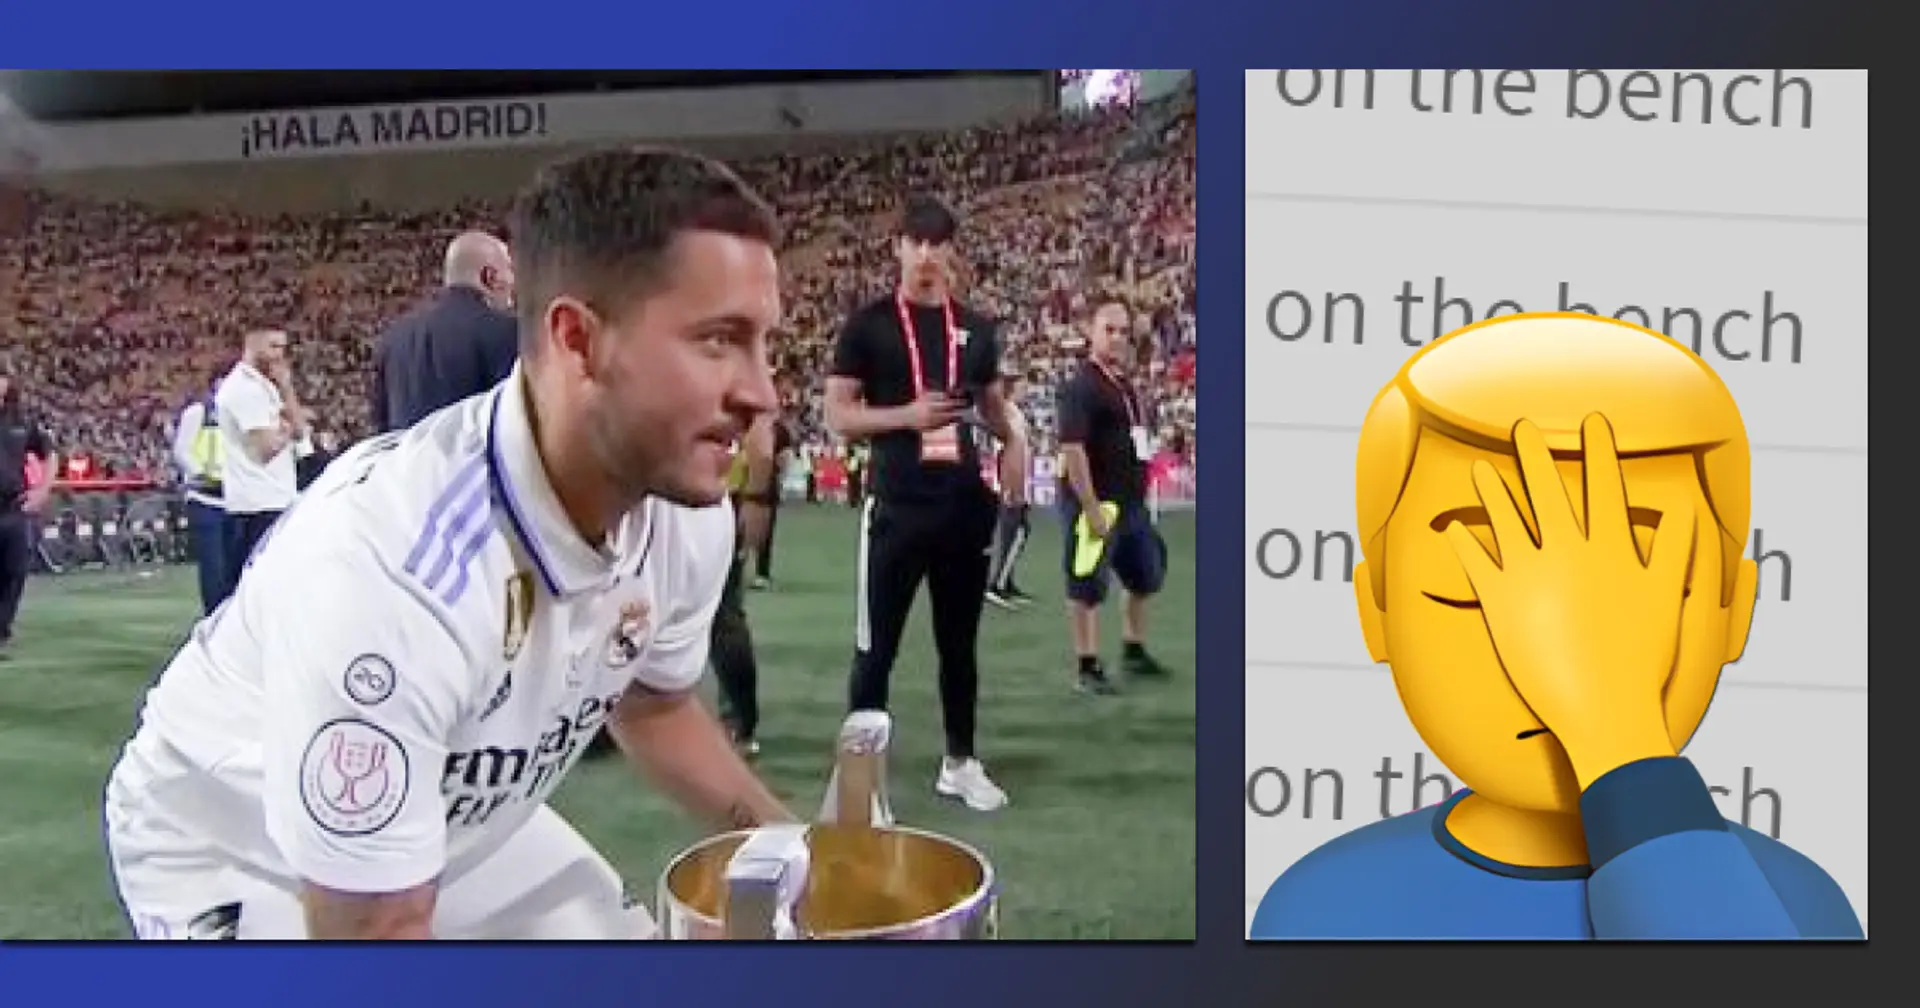 Eden Hazard has won every trophy possible with Real Madrid — it's almost comical for one reason